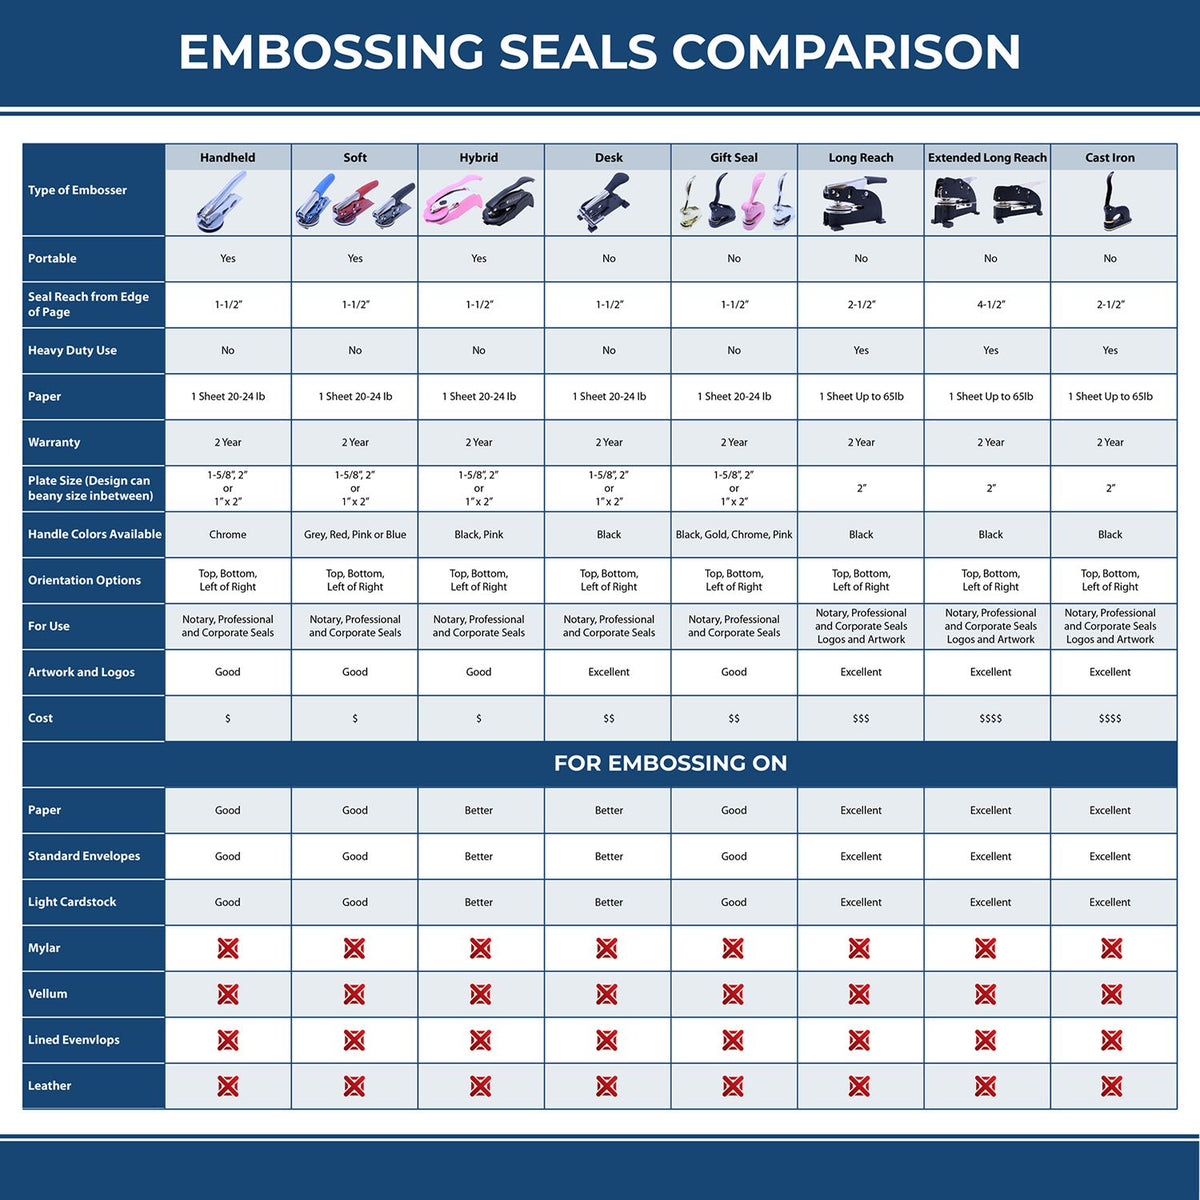 A comparison chart for the different types of mount models available for the Long Reach Maine PE Seal.